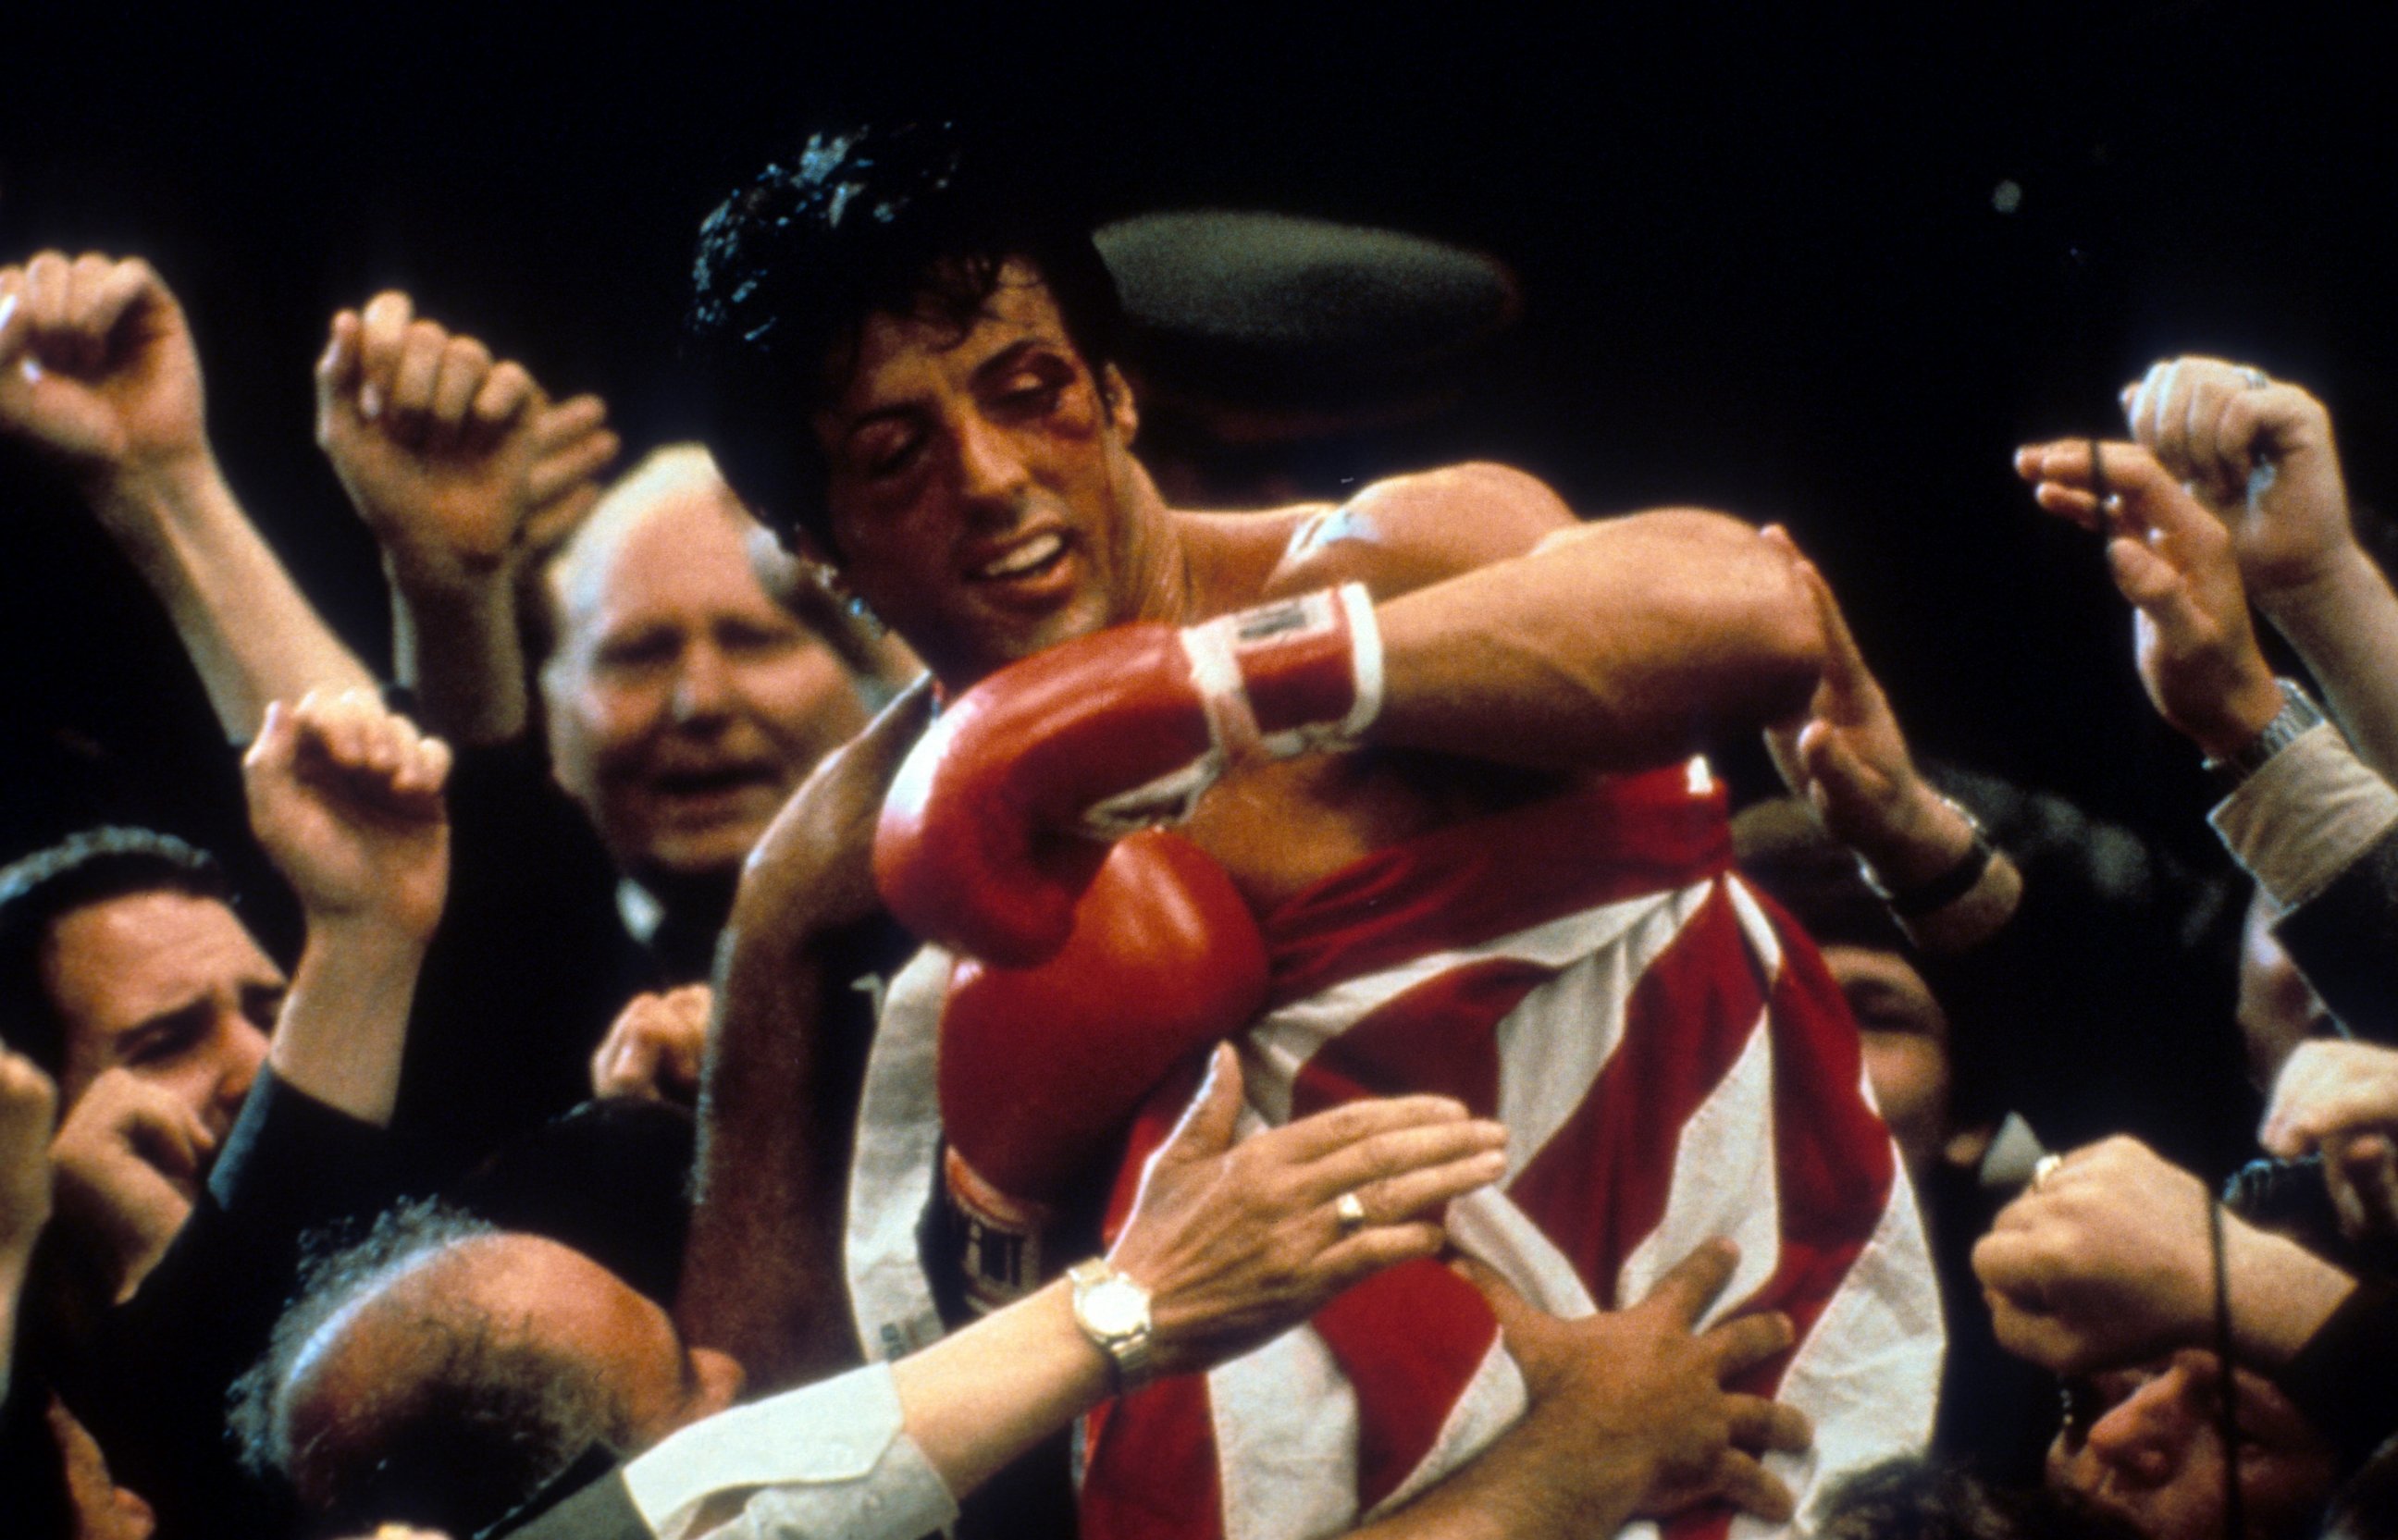 PHOTO: Sylvester Stallone after winning in a scene from the film "Rocky IV", 1985.